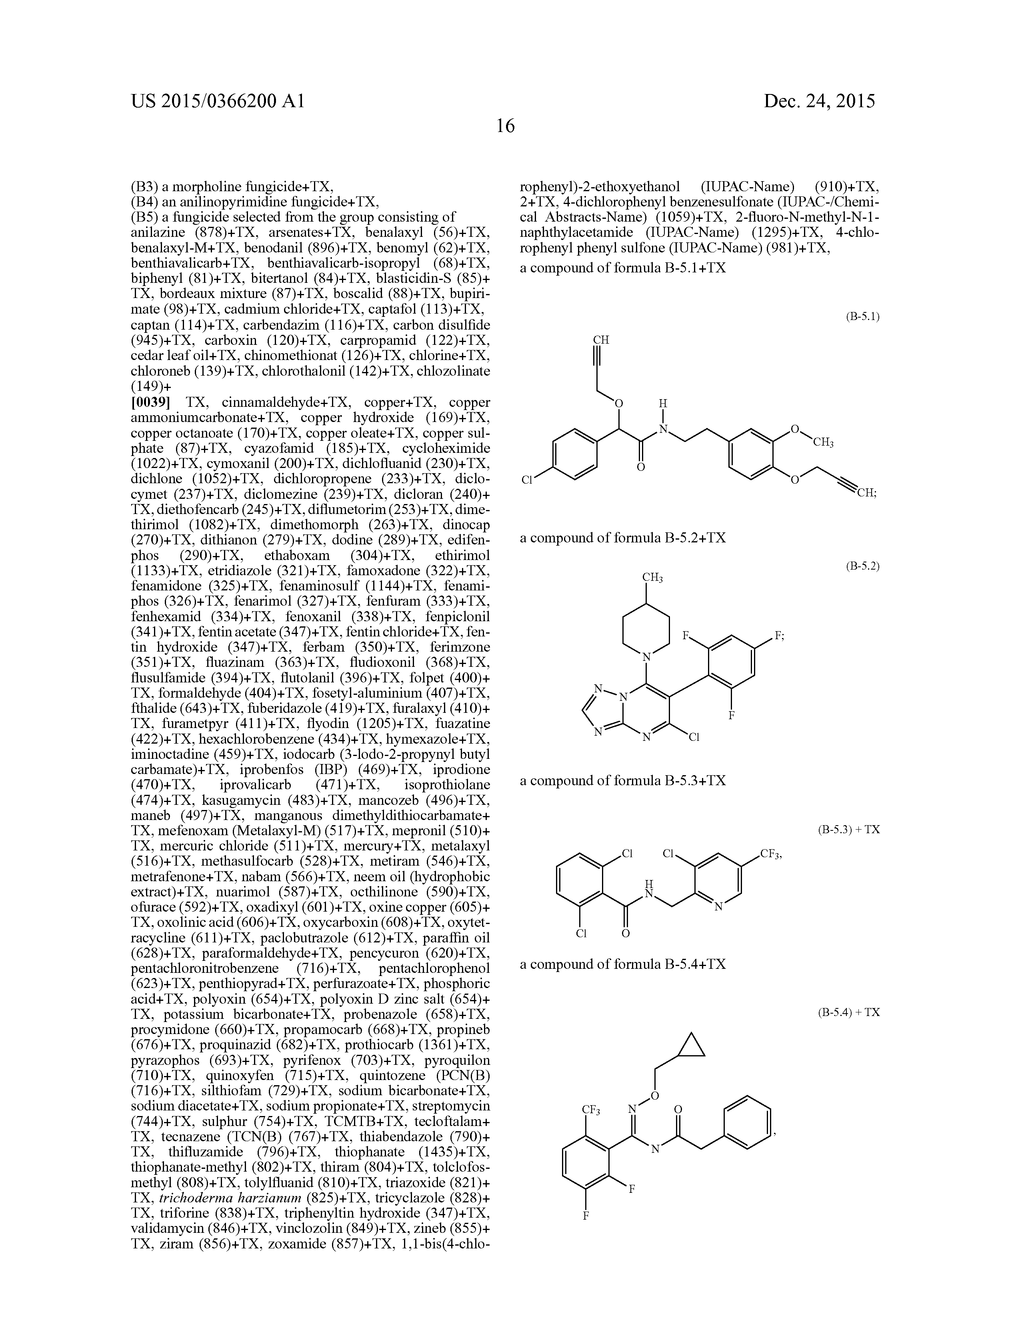 FUNGICIDAL COMPOSITIONS COMPRISING A CARBOXAMIDE - diagram, schematic, and image 17